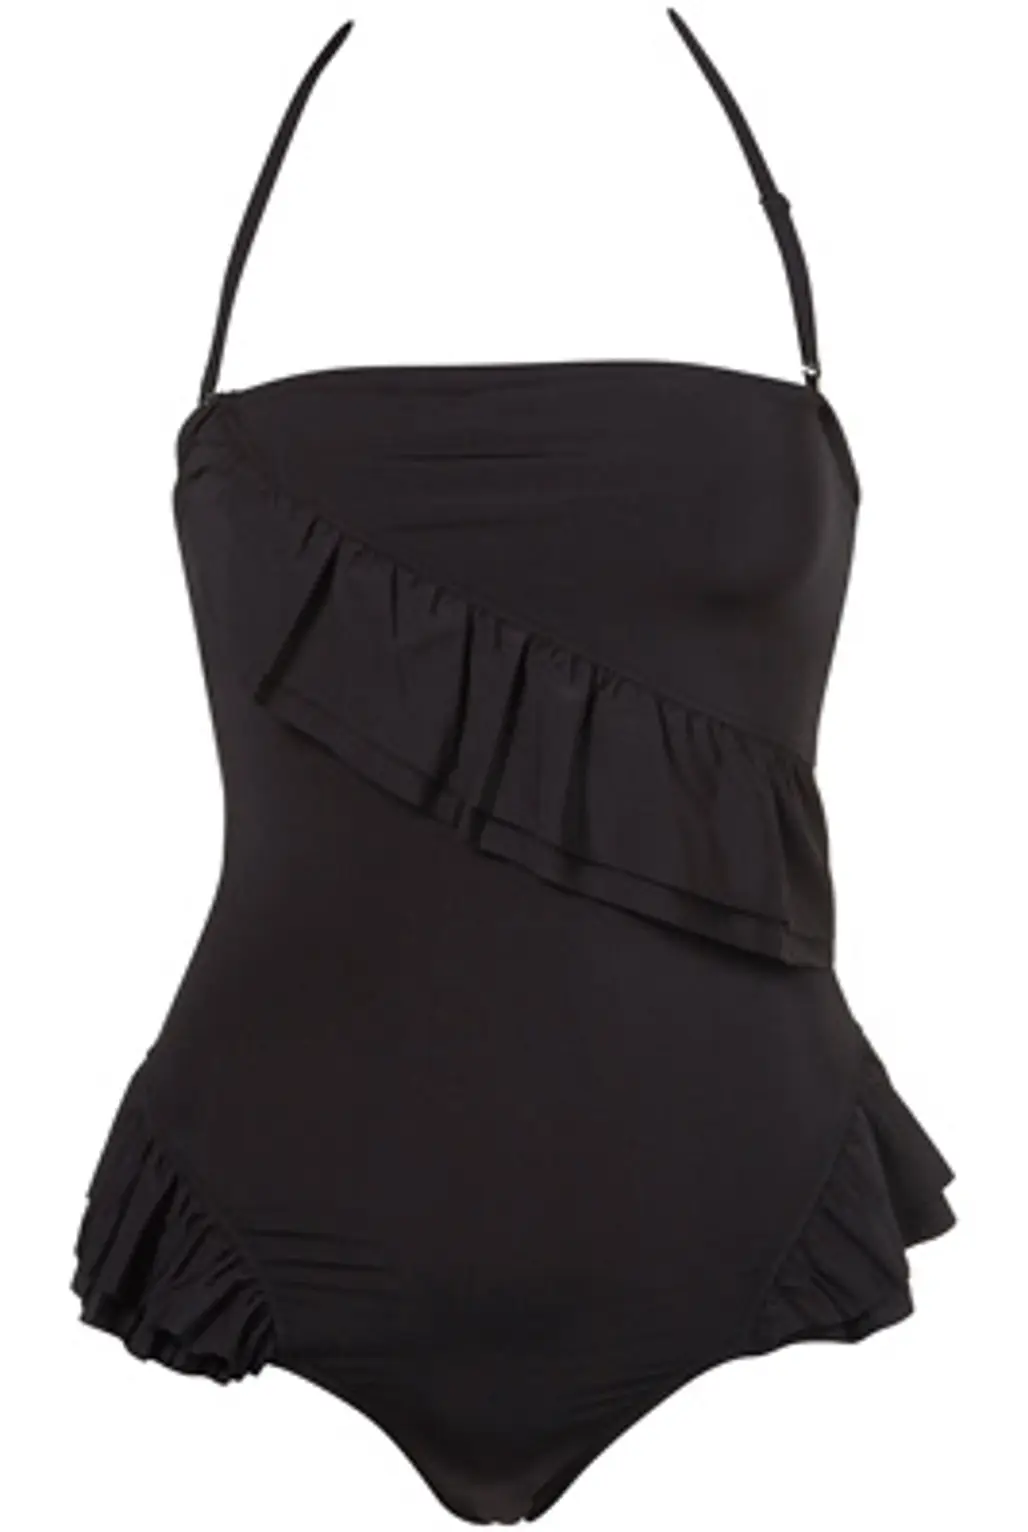 Topshop Black Slink Frill One Piece Swimsuit